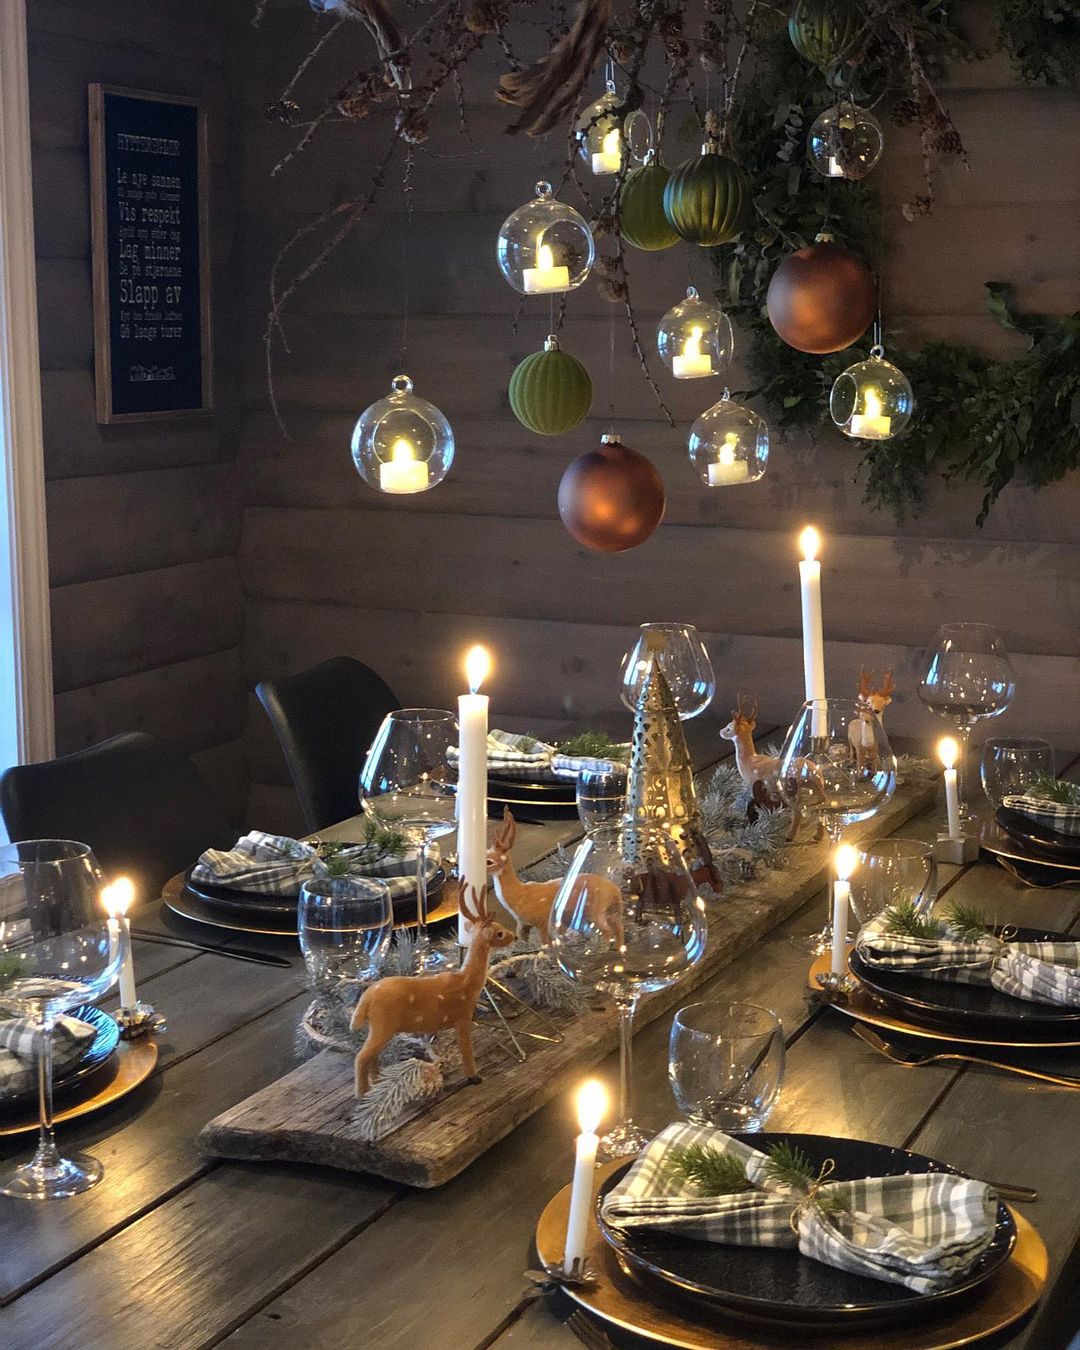 Scandinavian Style Christmas table! One of the most popular tabletop Christmas decor ideas!